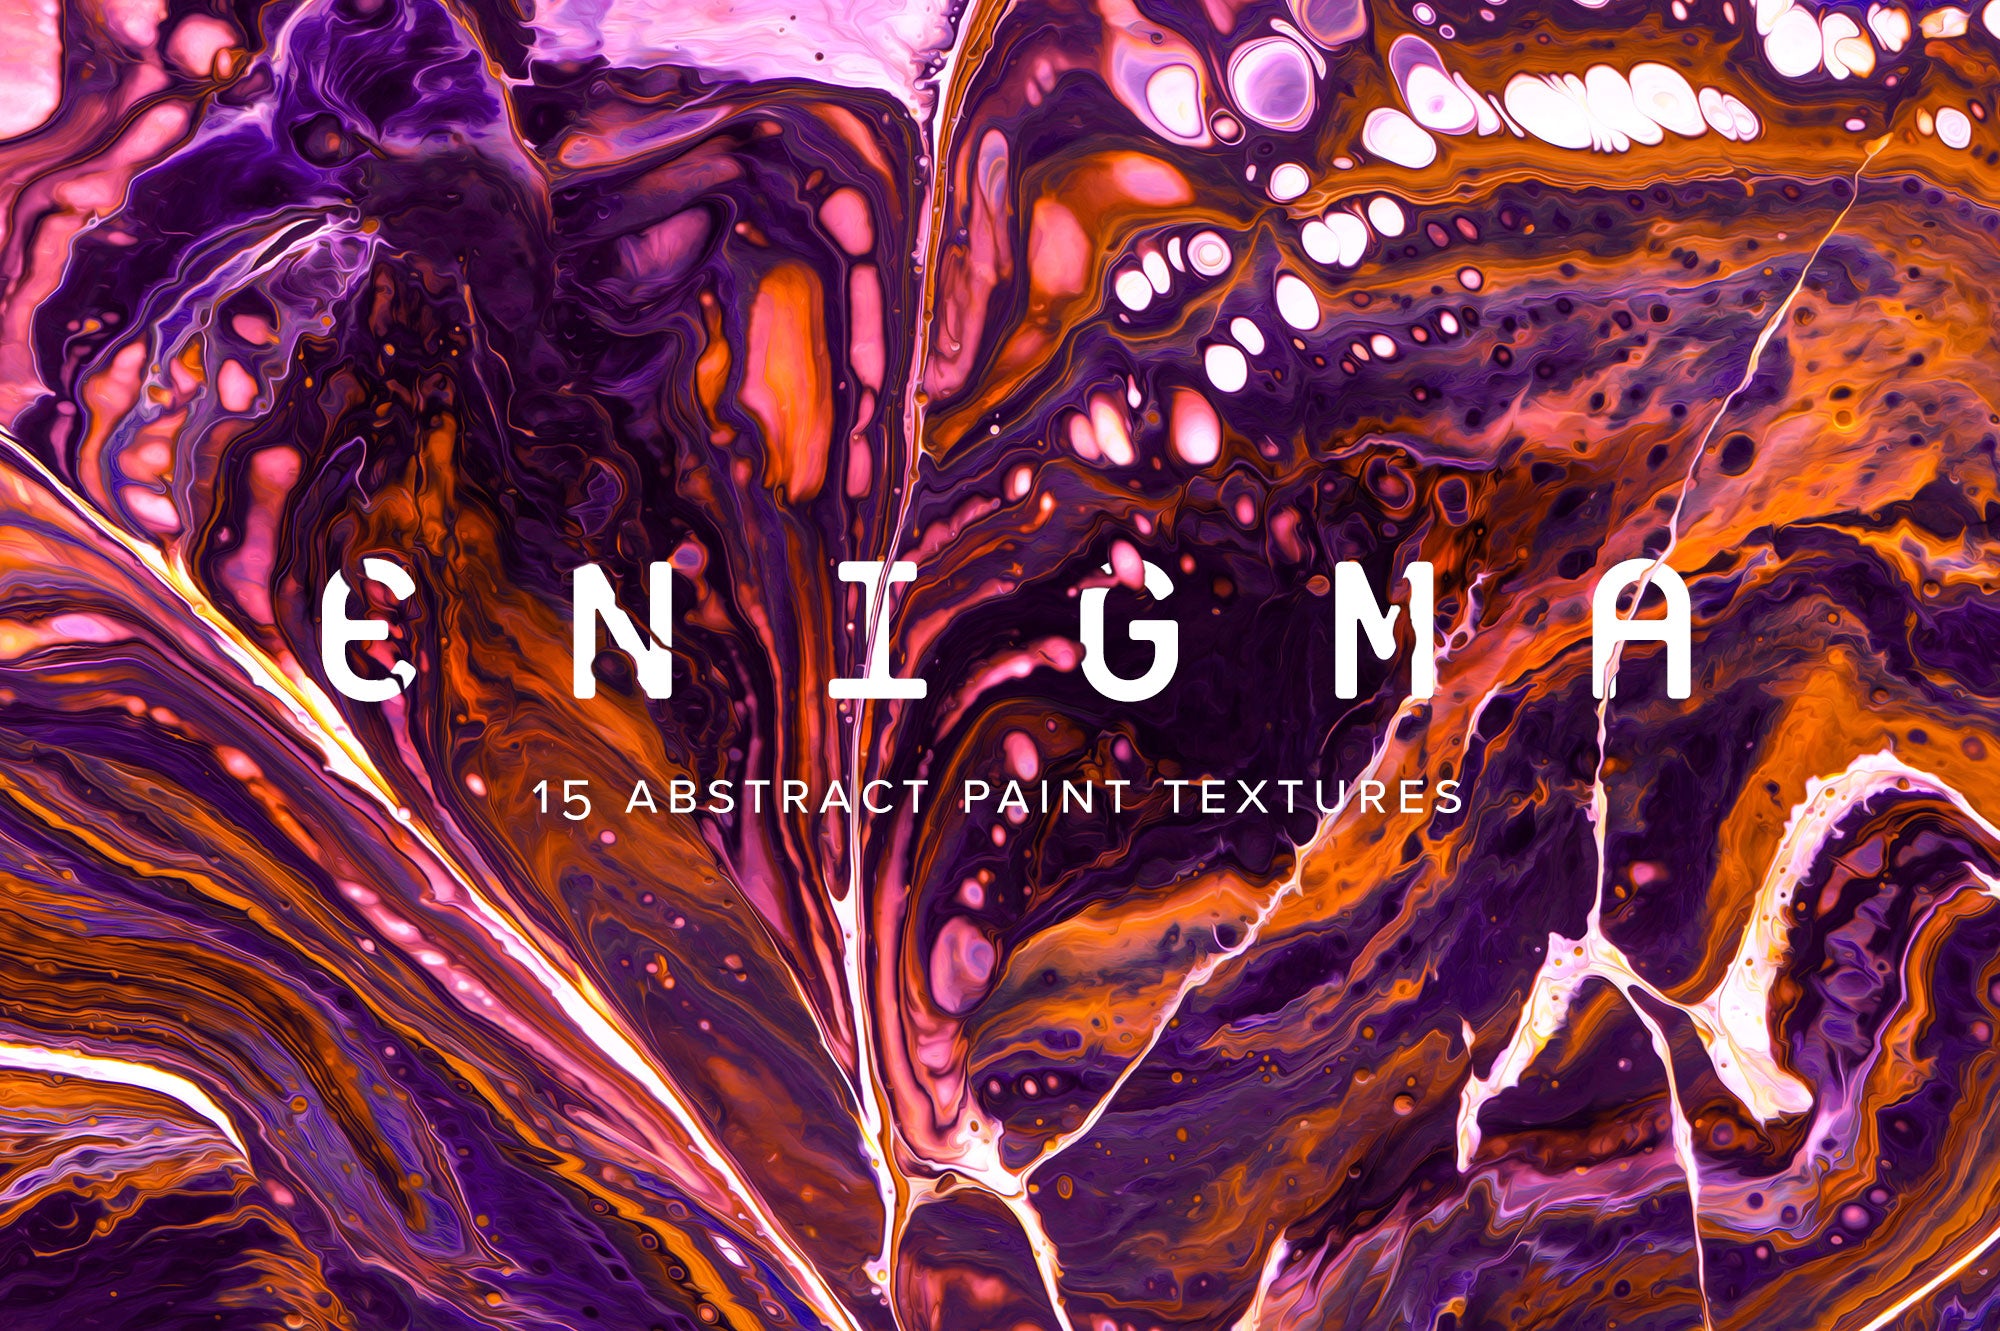 Enigma: 15 Abstract Paint Textures